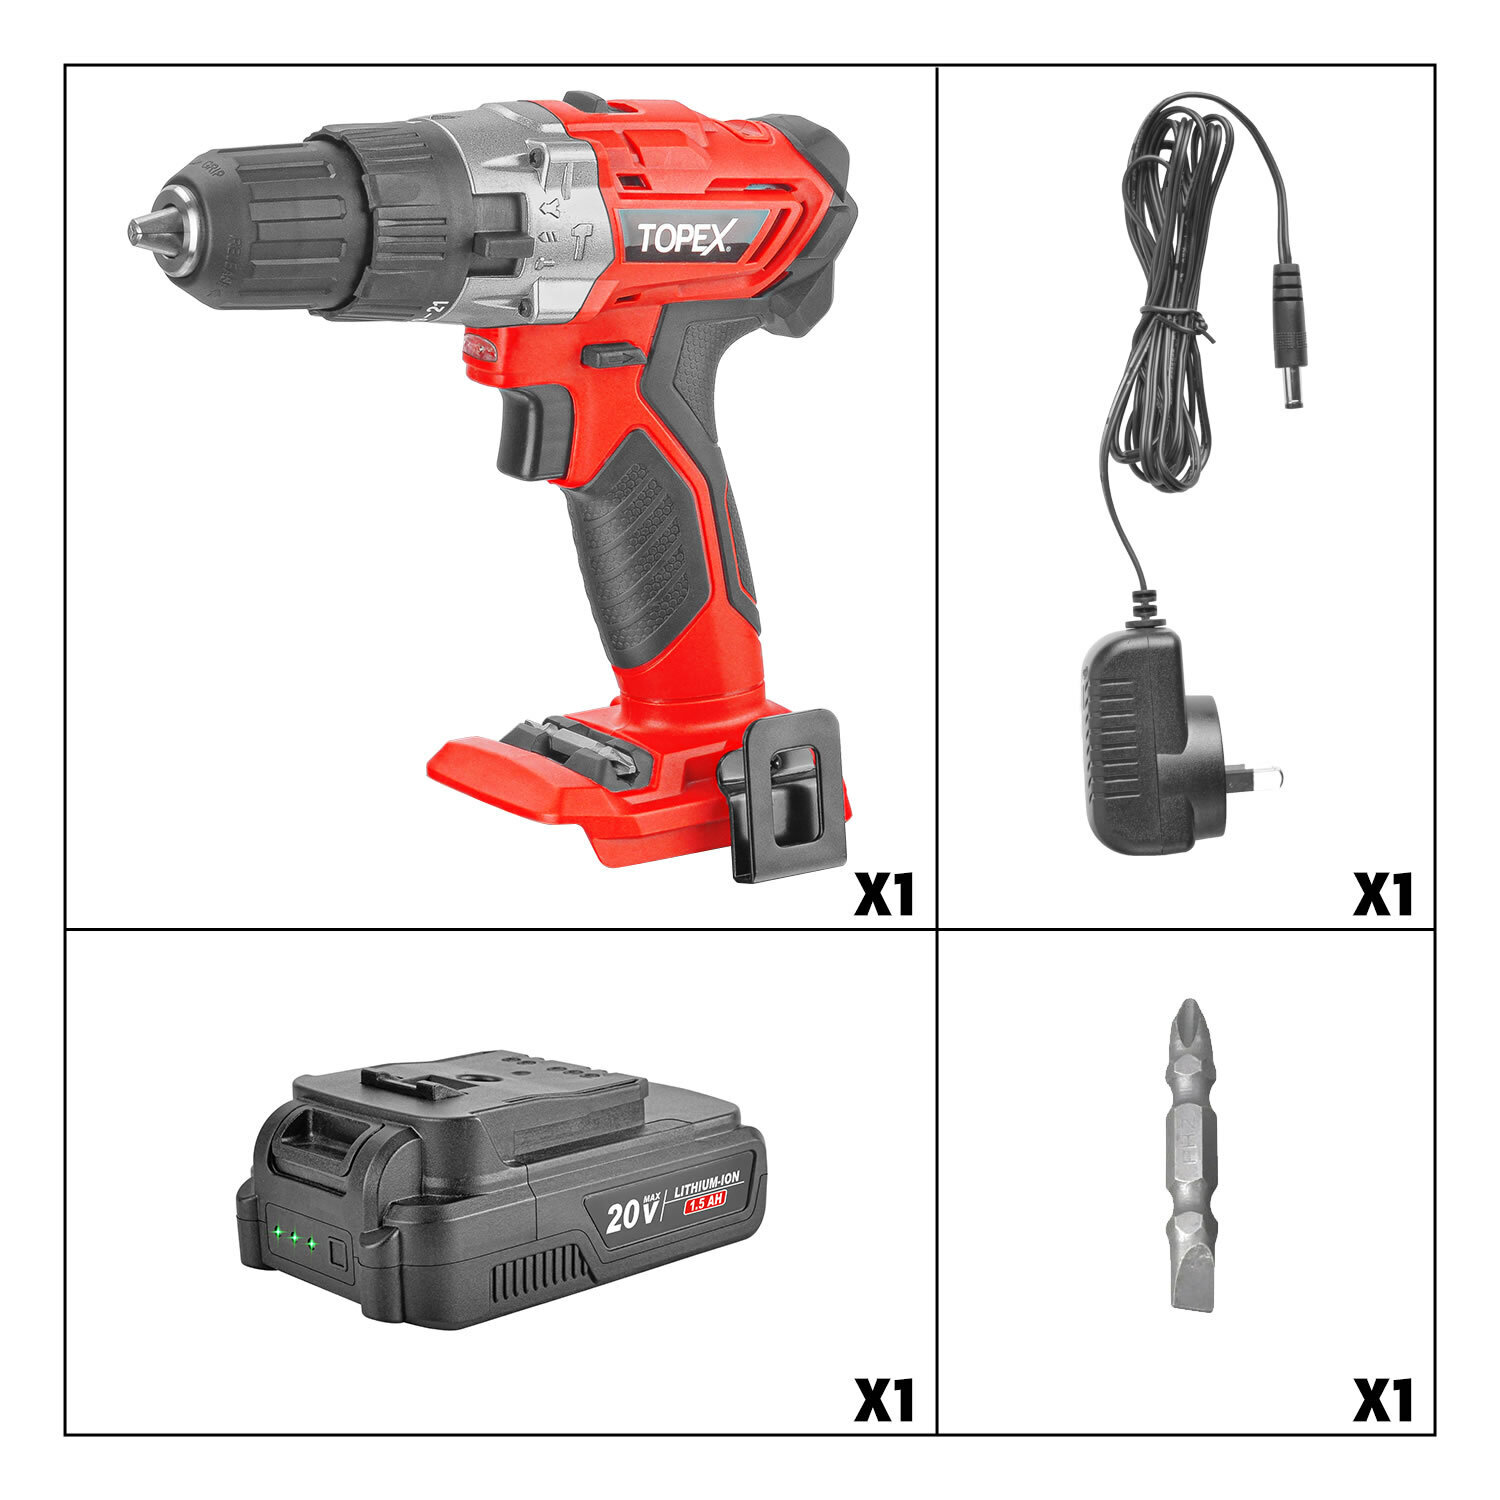 TOPEX 20V Lithium-Ion Cordless Drill Driver Impact Hammer drill w/ Battery Charger